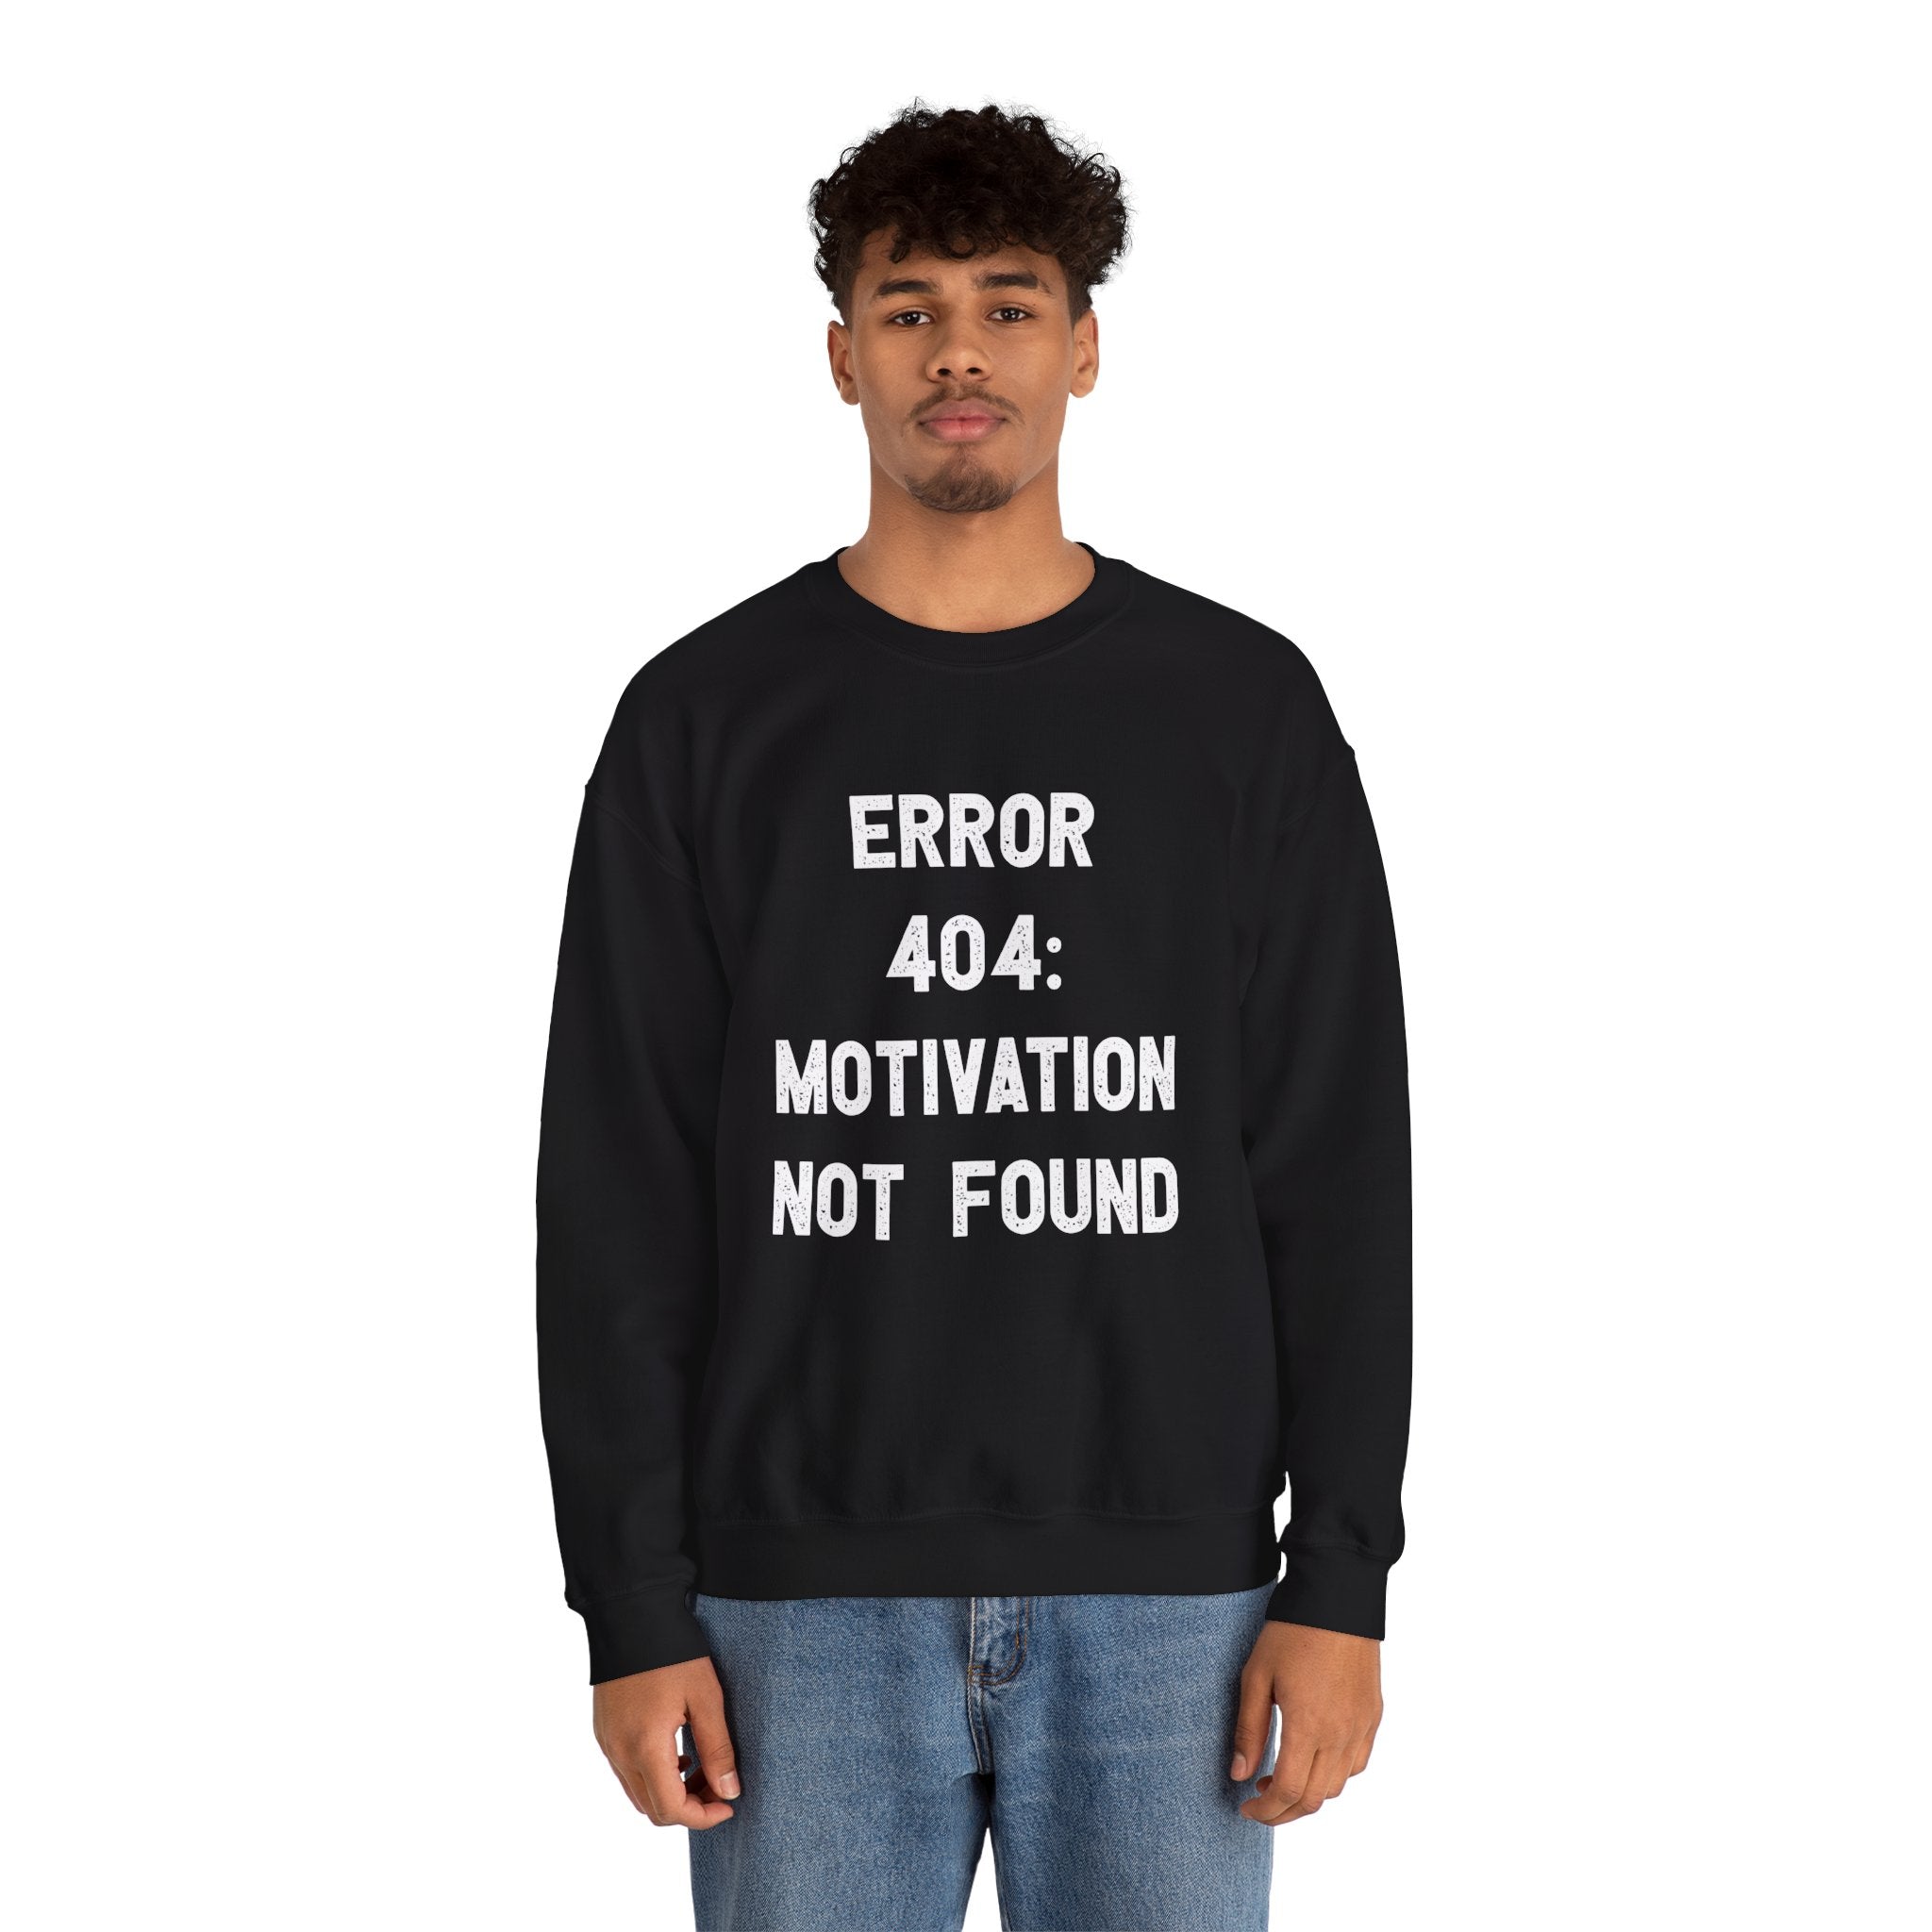 A person stands facing forward, wrapped in the cozy comfort of a black Error 404: Motivation not found - Sweatshirt with white text reading, "ERROR 404: MOTIVATION NOT FOUND." They have short curly hair and are wearing light blue jeans—perfect attire for the colder months.